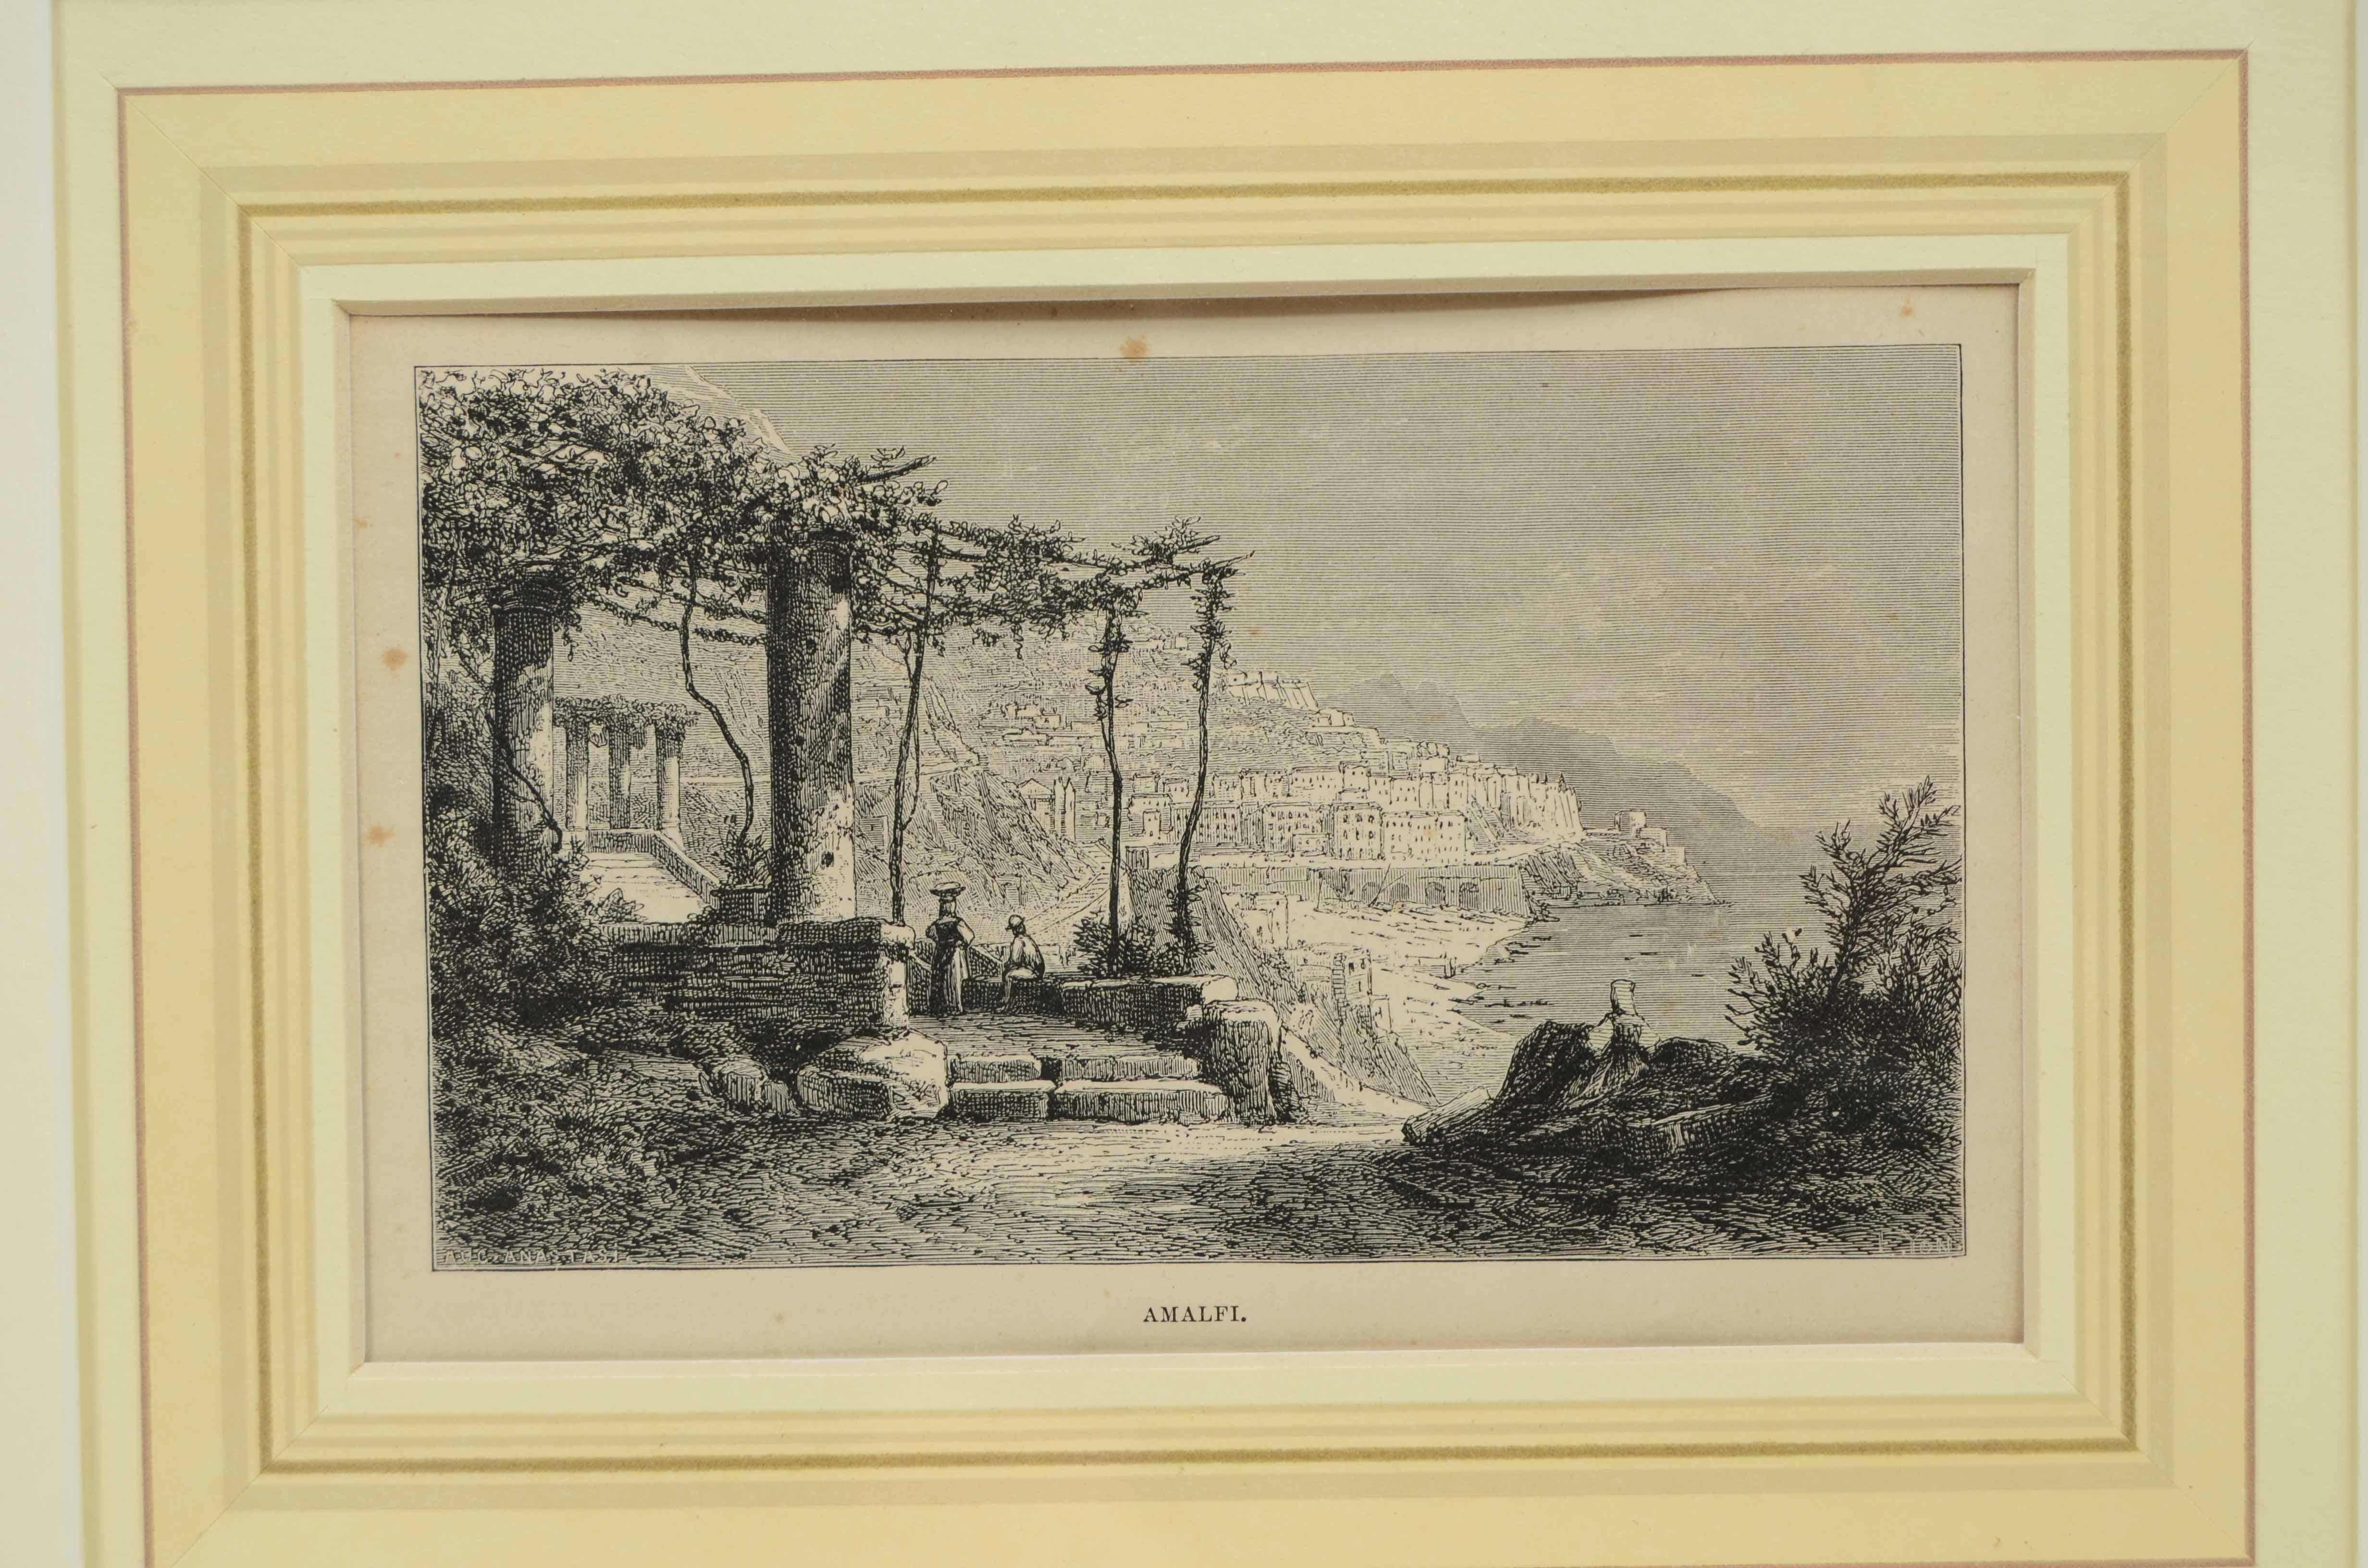 19th Century Lithograph on paper of Amalfi Italy signed Auguste Anastasi mid-19th century. For Sale